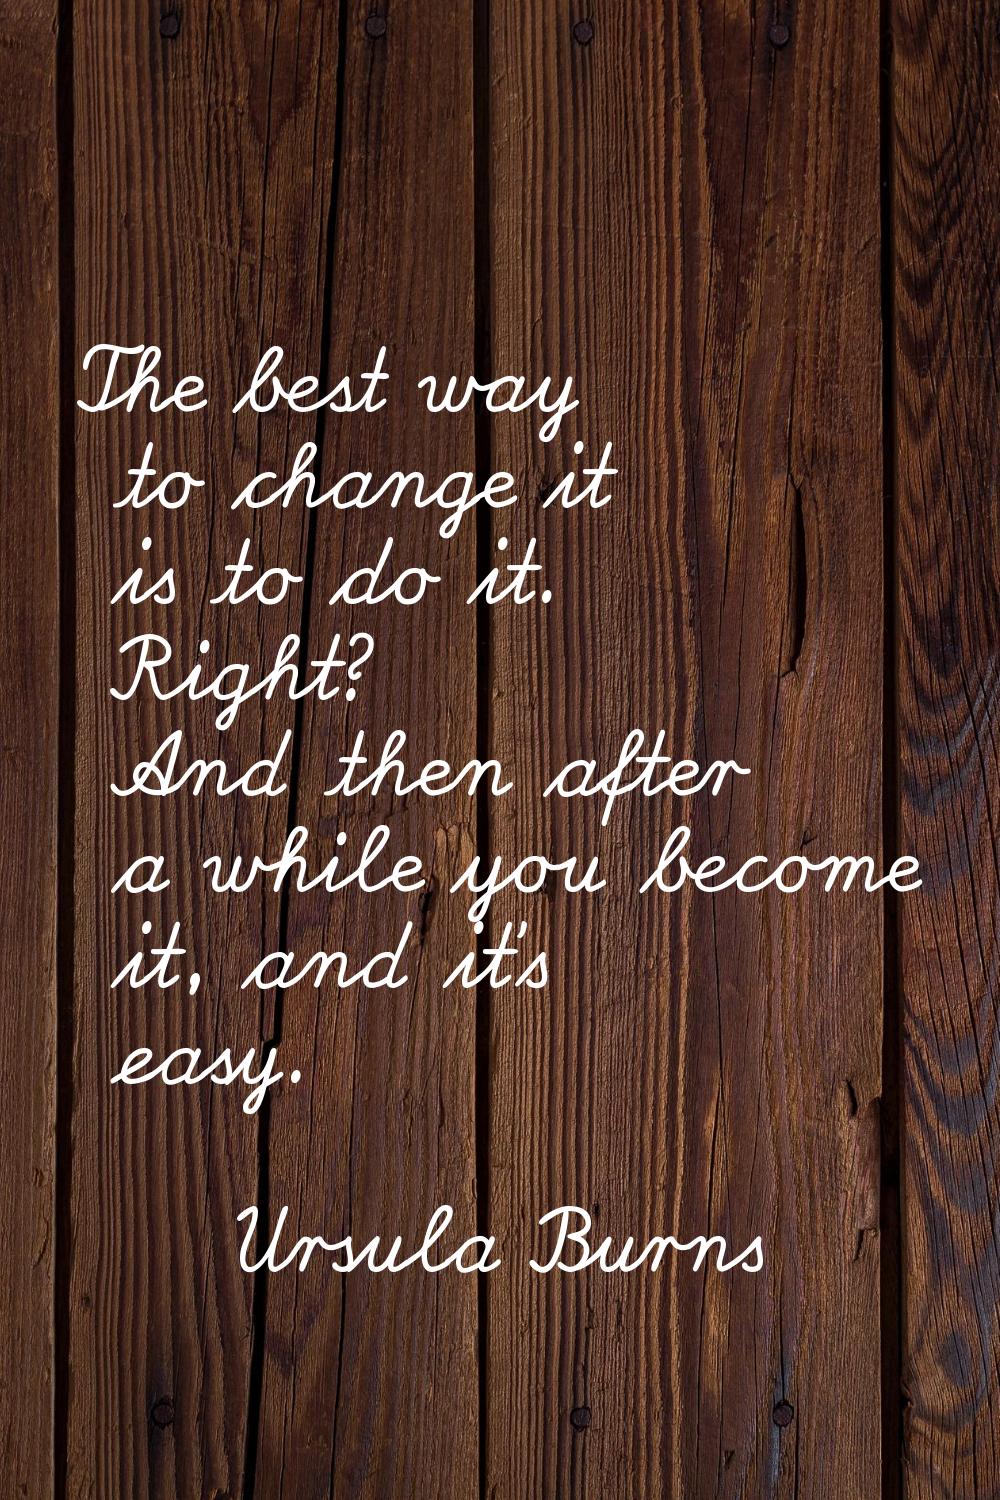 The best way to change it is to do it. Right? And then after a while you become it, and it's easy.